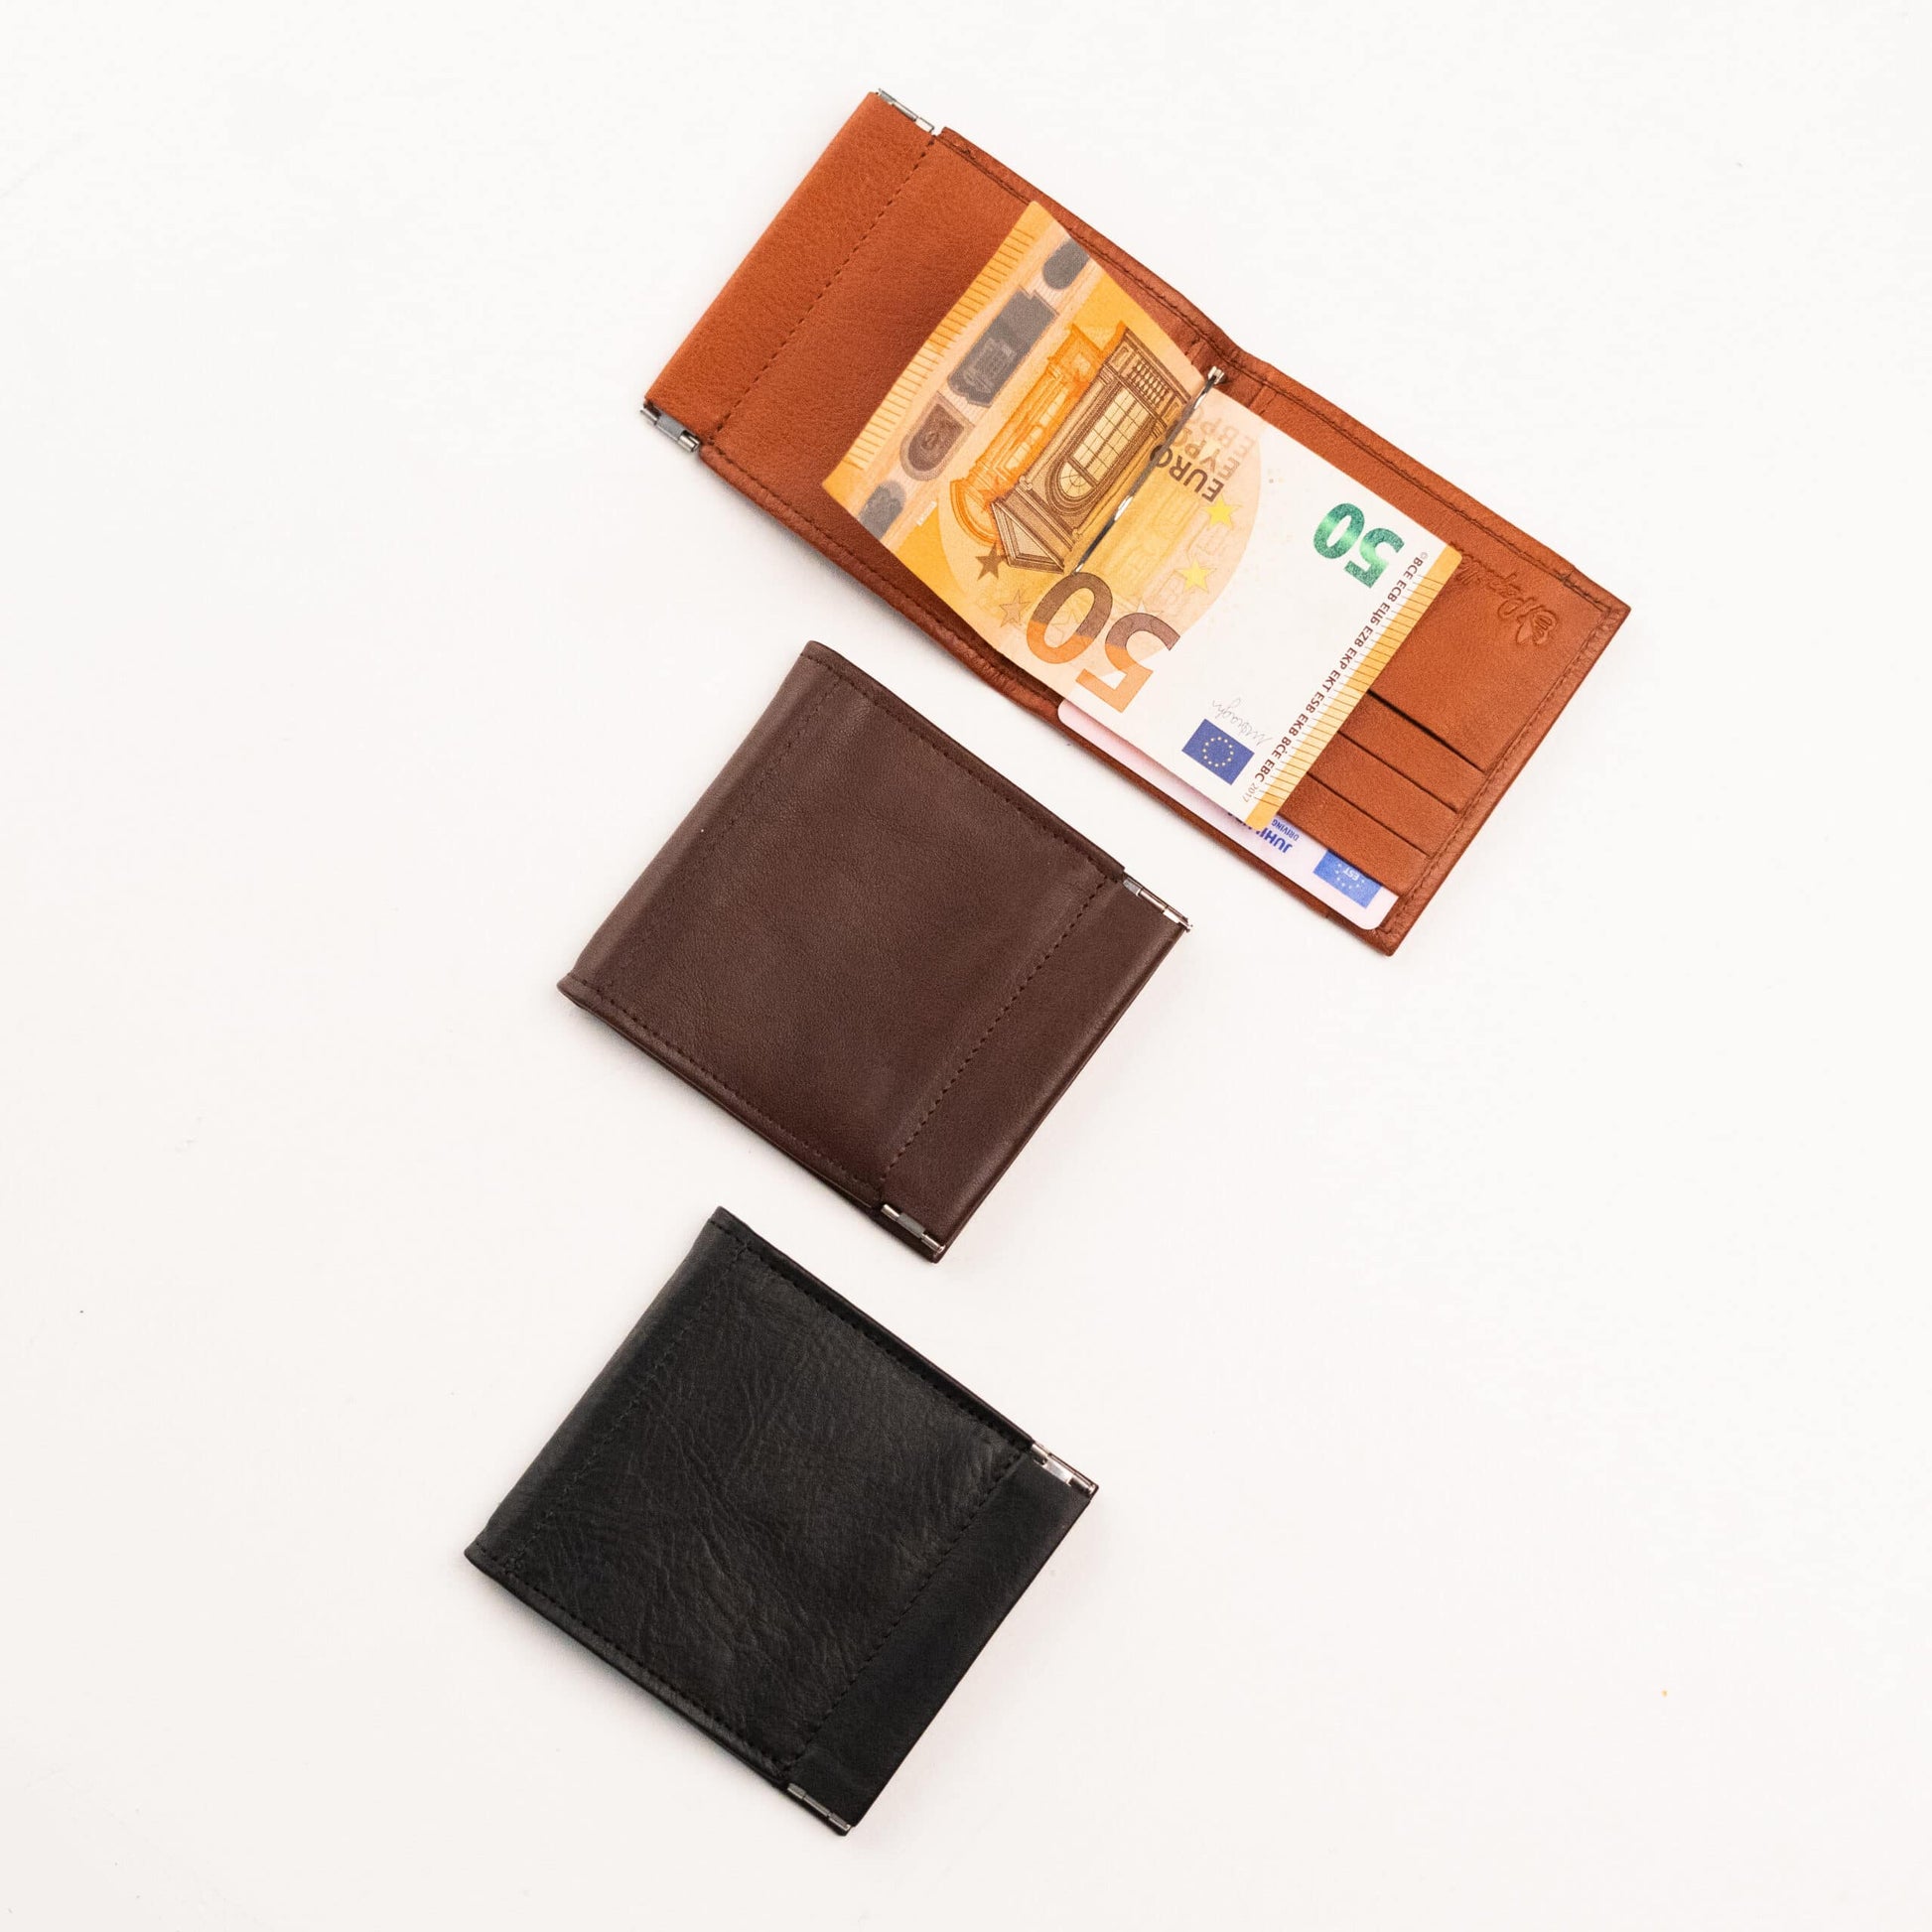 A Leather Wallet with money clip and coin pouch, made from genuine leather in Europe. Features 9 card slots, 1 ID window, and a metal clip for paper currency. Compact and stylish.